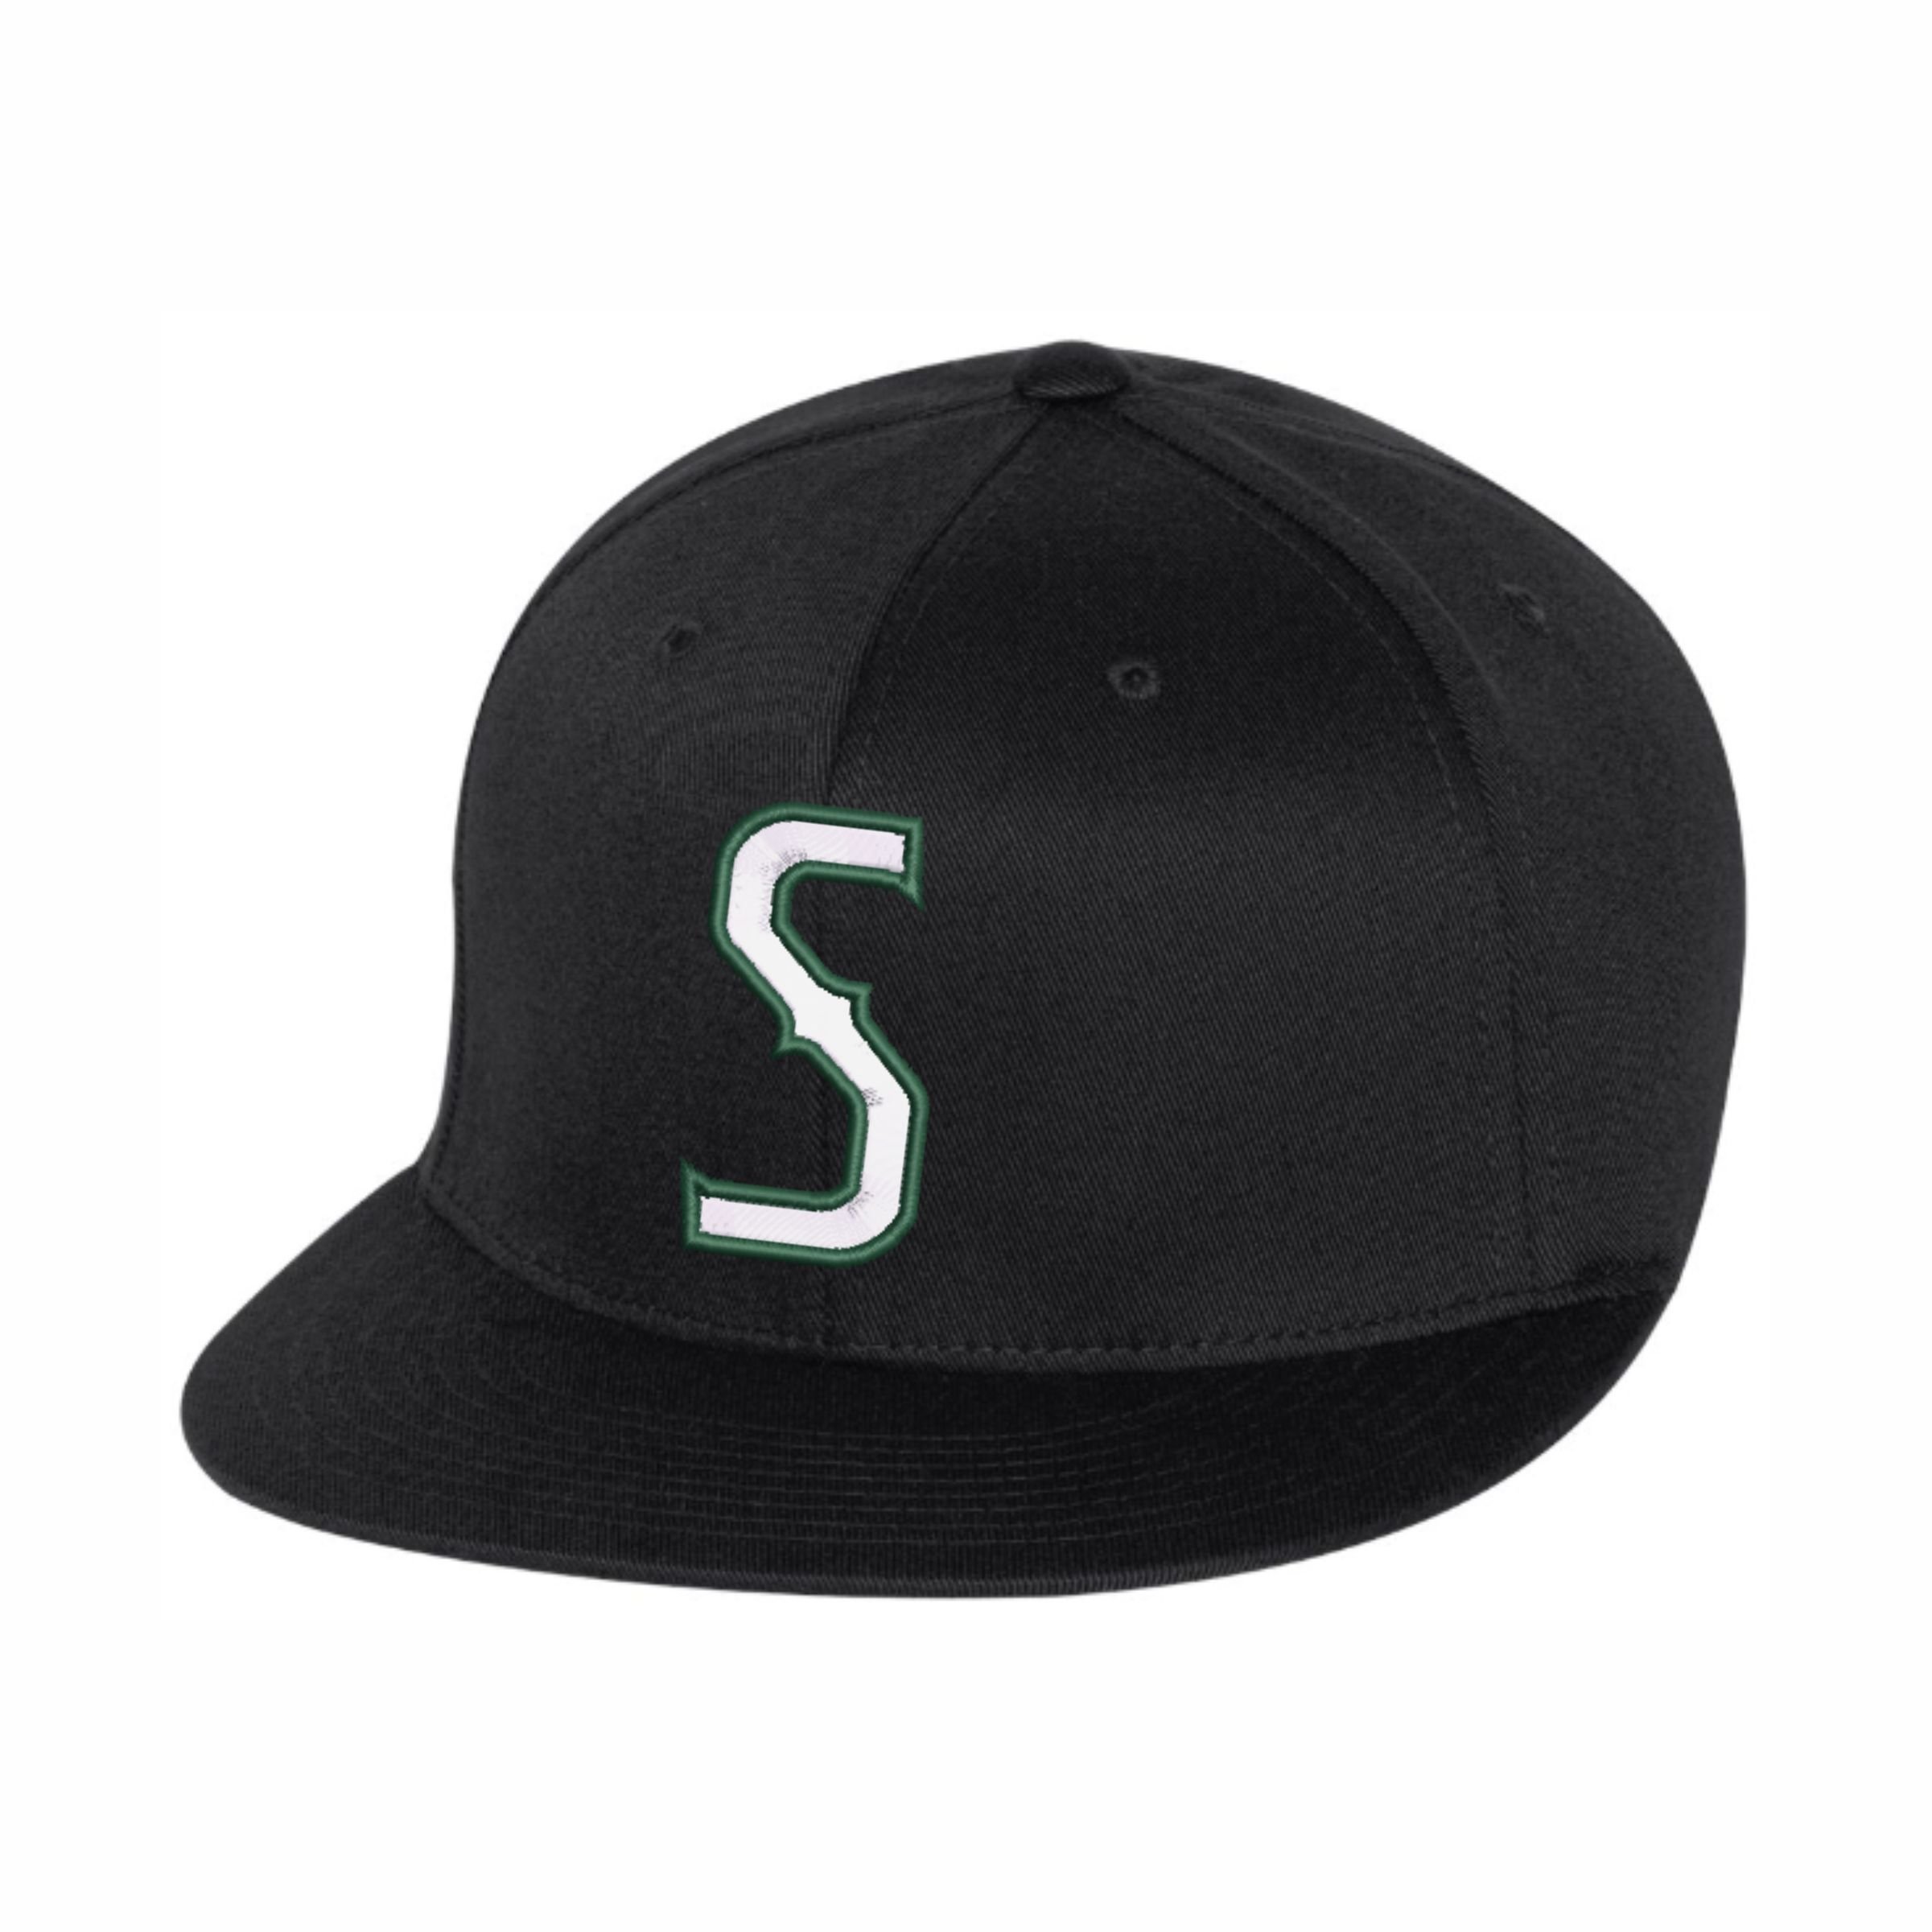 Stanwood Cannons Baseball & Softball Apparel, Hats and Accessories ...